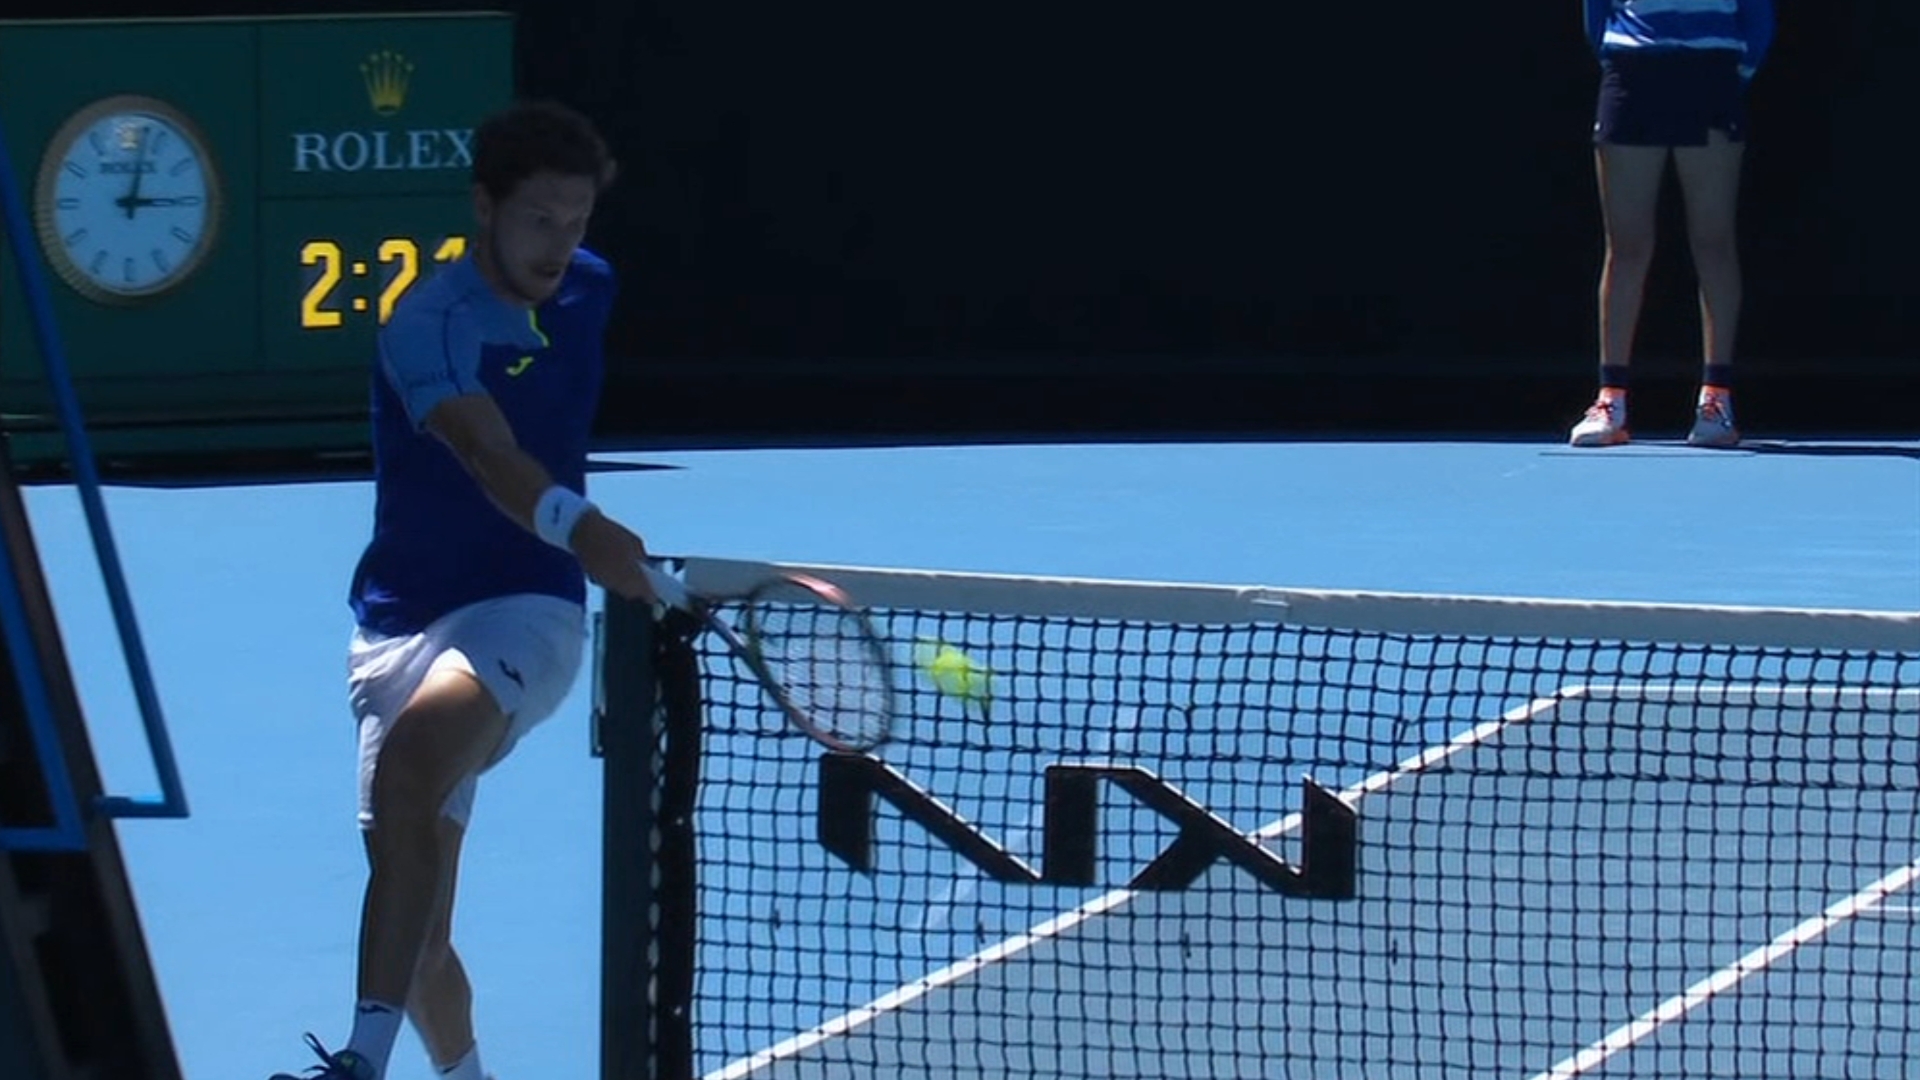 Carreno Busta wins extraordinary point from opponents side of the net - Stream the Video